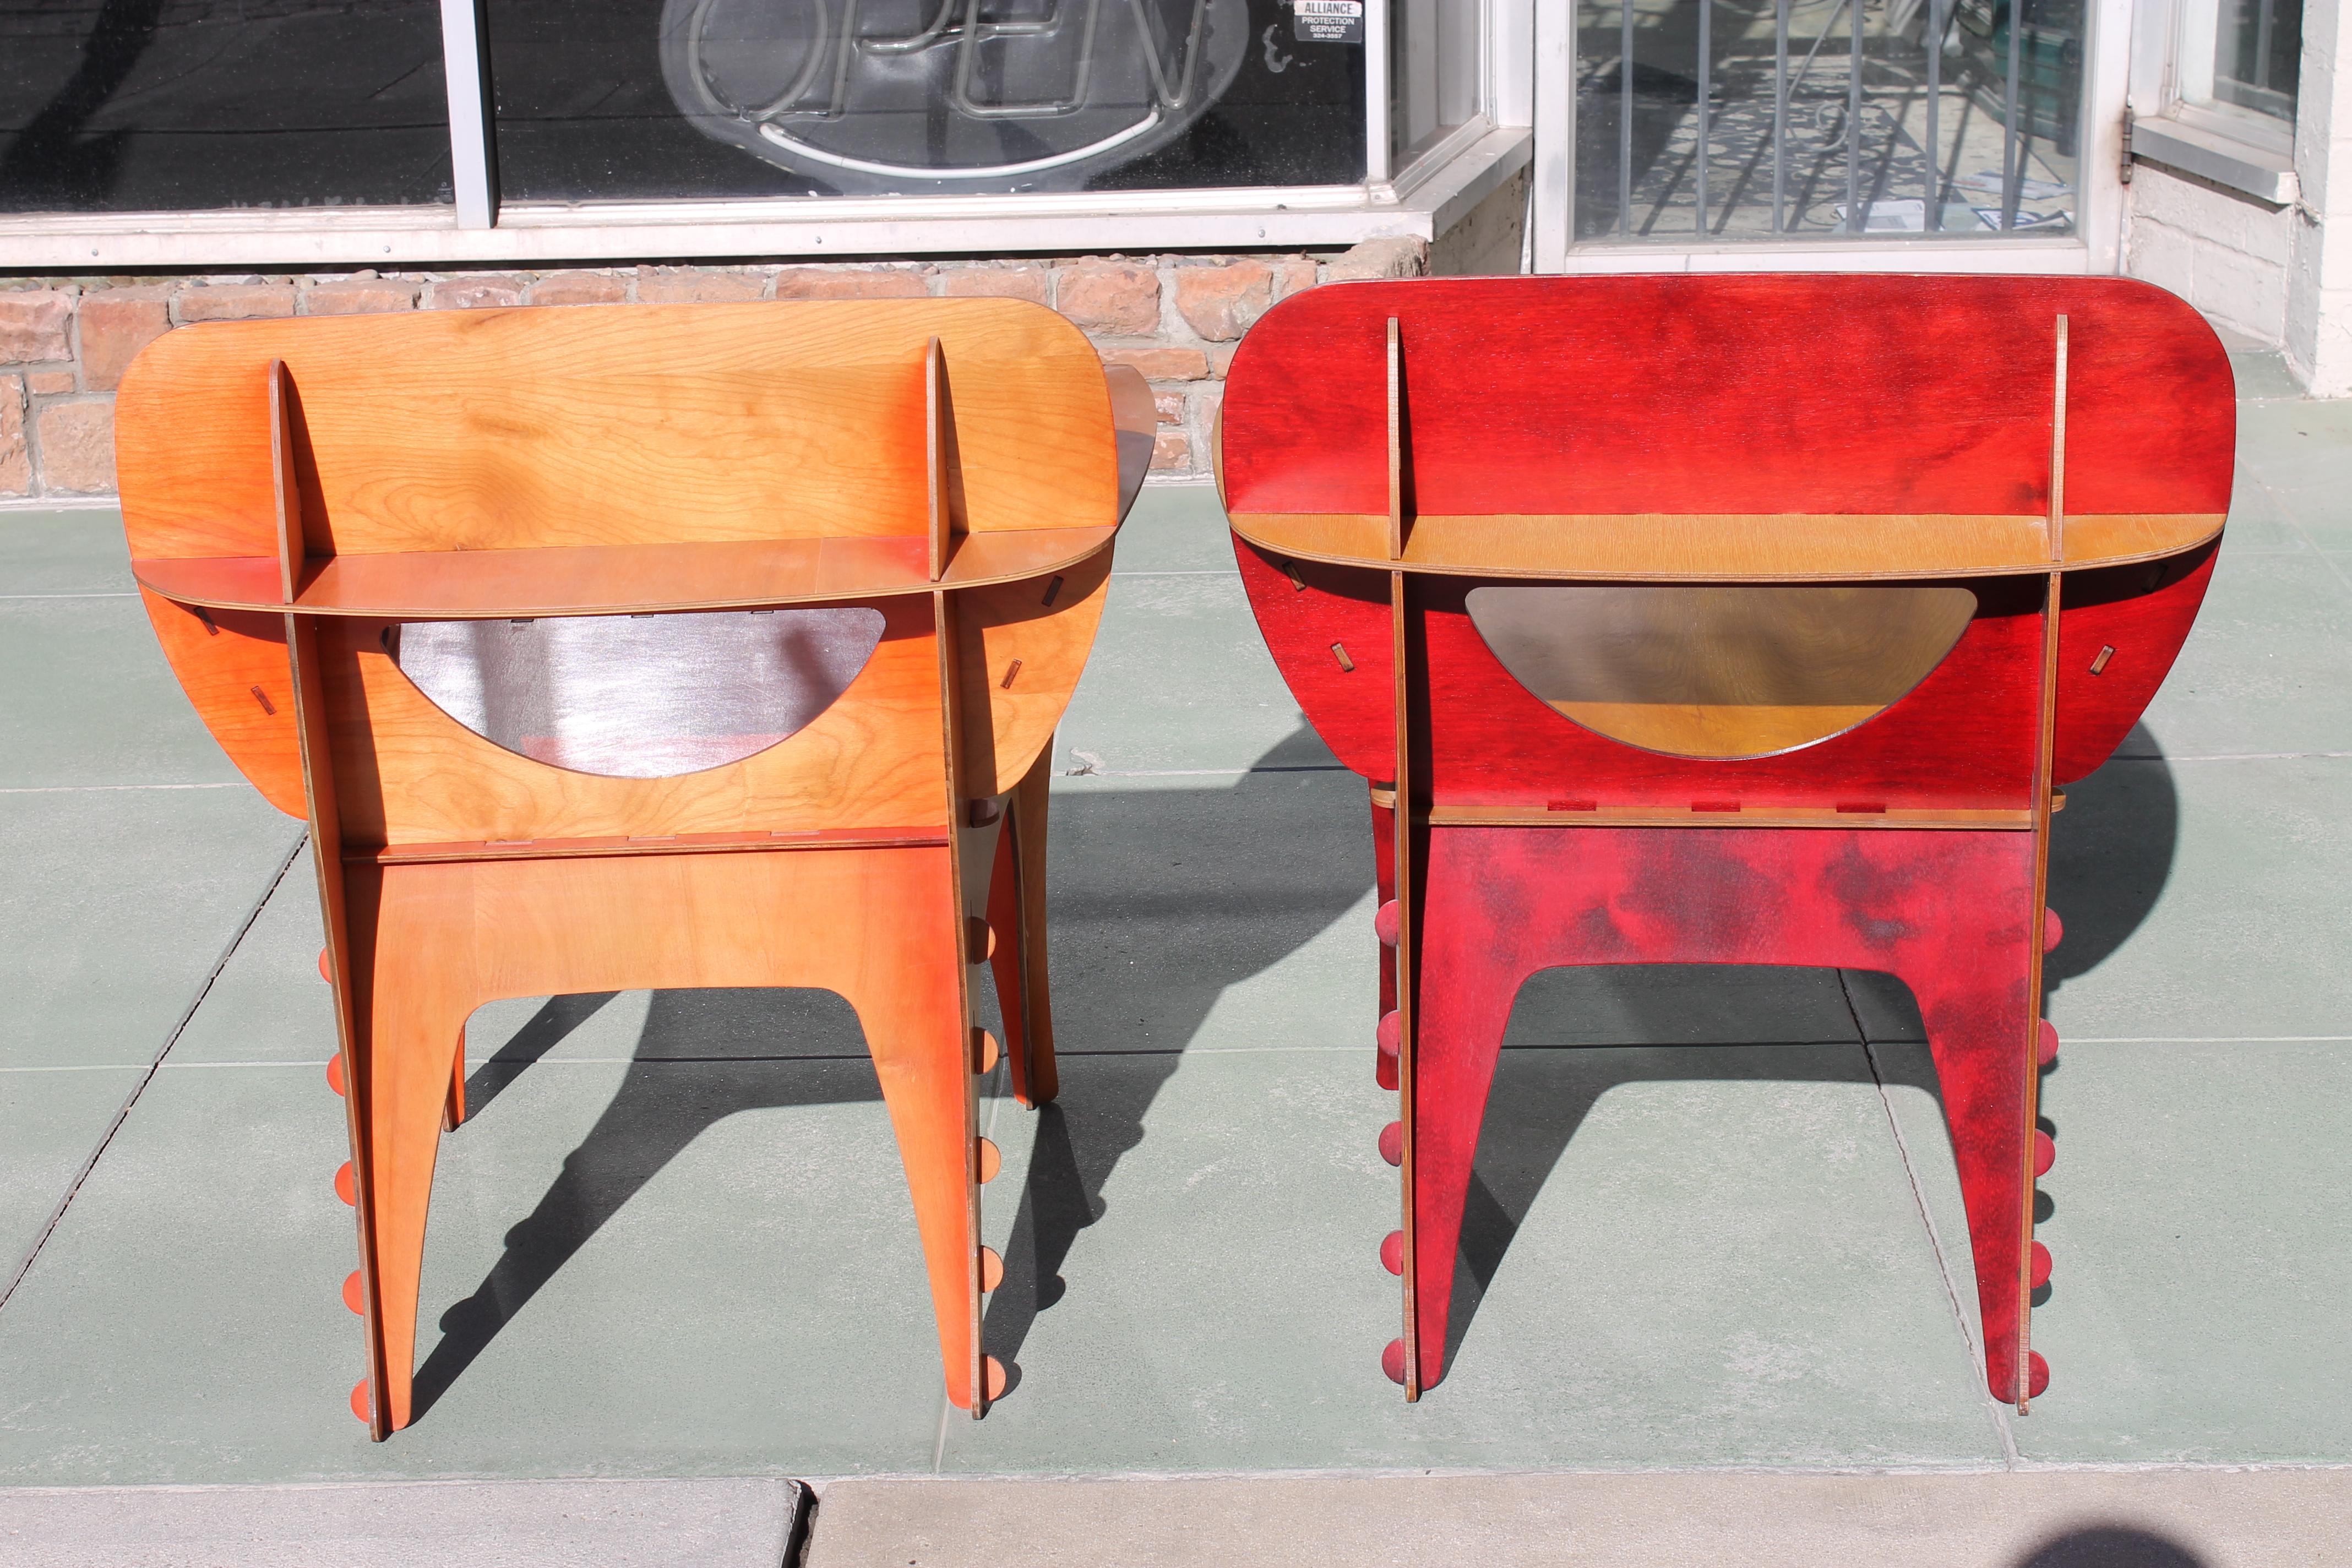 Two chairs by David Kawecki, San Francisco. Original birch plywood design stained reds. Chairs measure 29.5” wide, 25” deep, 33” high. Seat height is 18